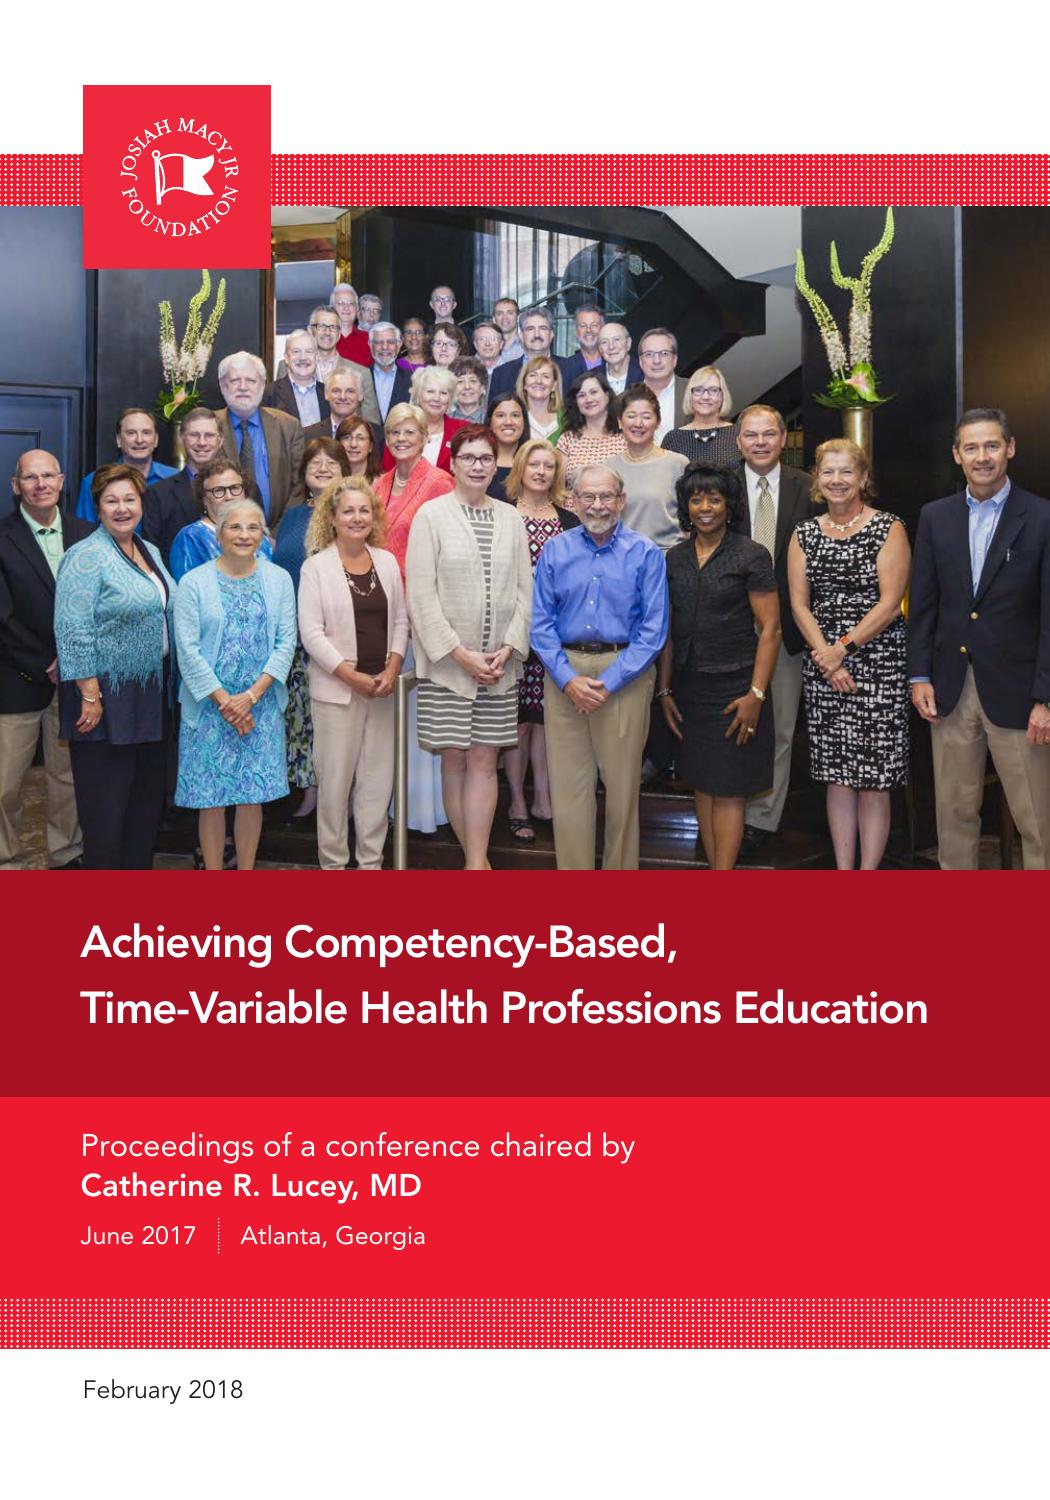 Achieving Competency-Based, Time-Variable Health Professions Education 2018